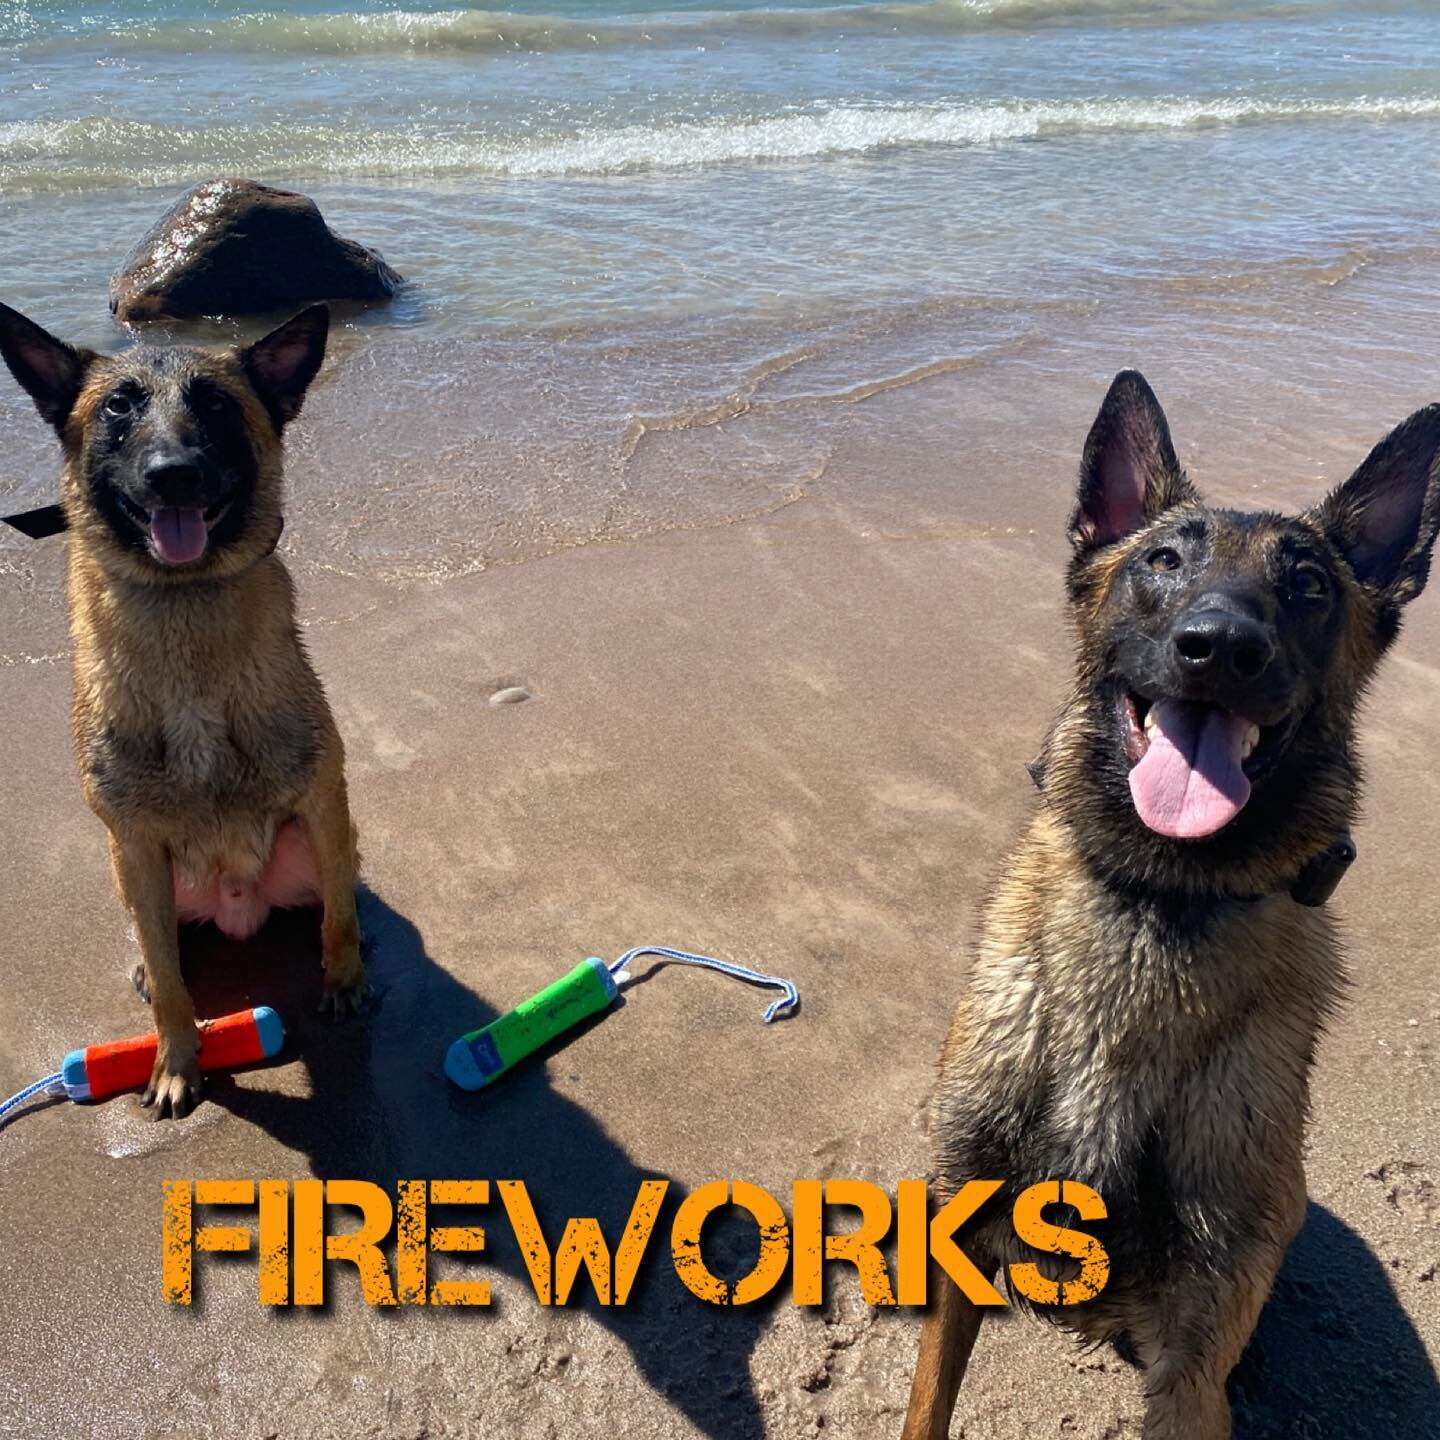 I used to give people tips for helping their dogs get comfortable with fireworks, but the truth is, fireworks are extremely loud (about 50 dB louder than gunfire) and dogs have extremely sensitive hearing compared to humans. I can tell people to foun